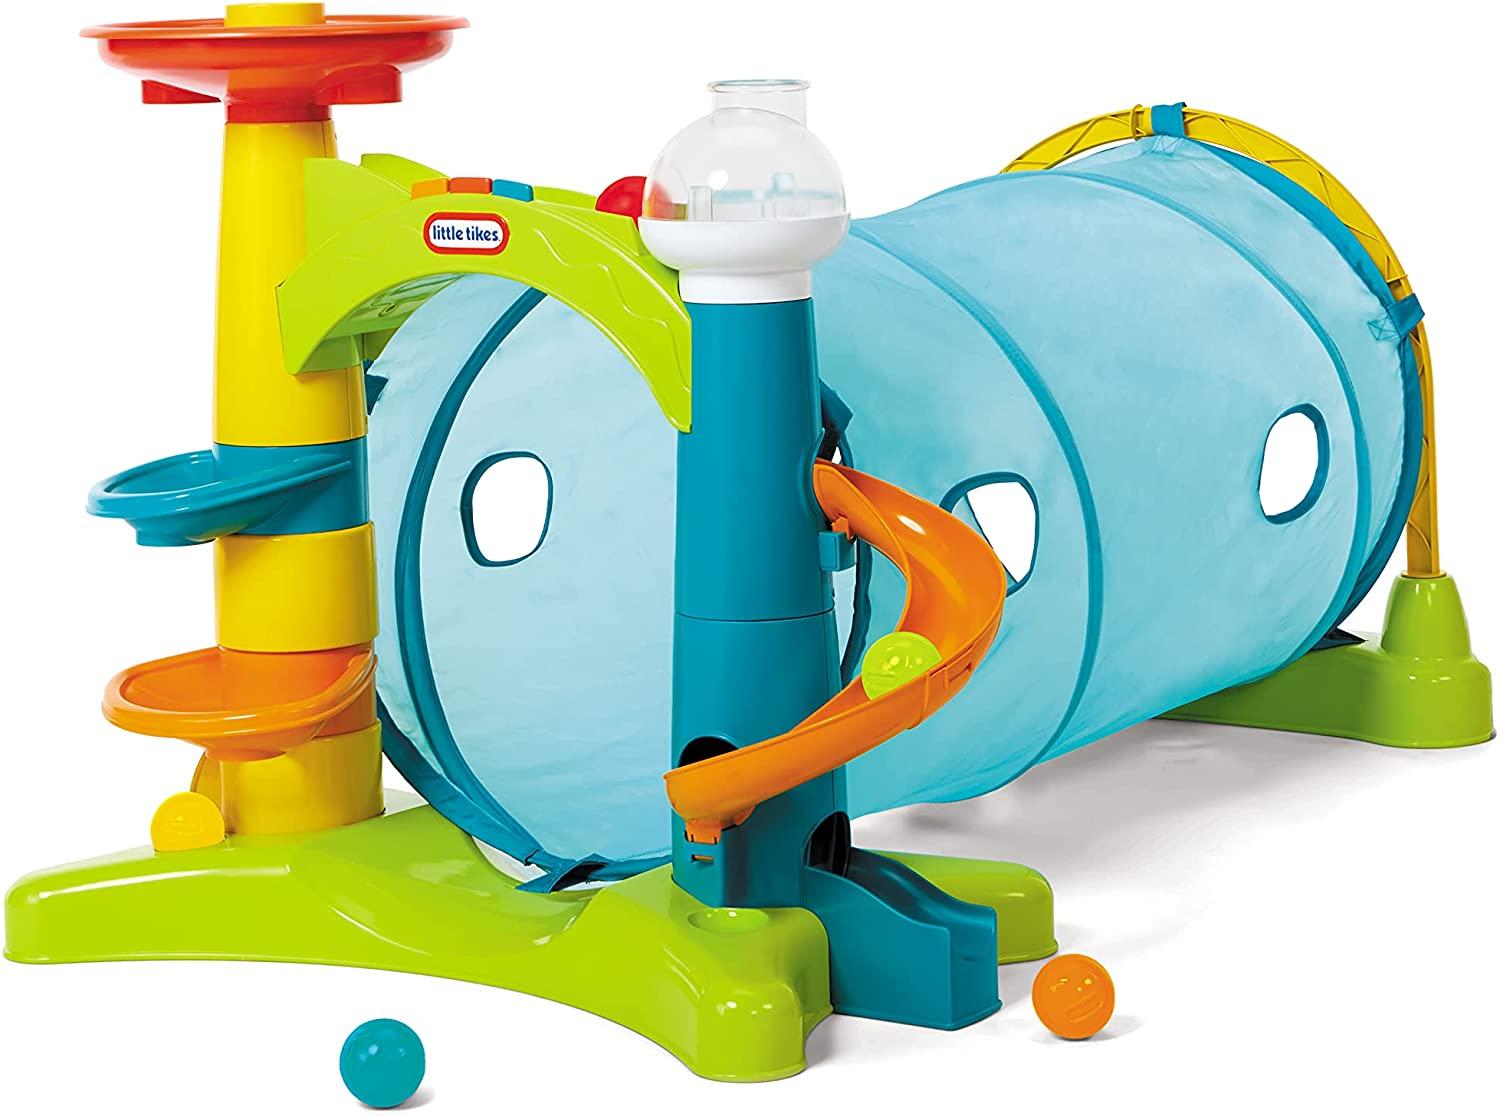 Little Tikes Learn and Play 2-in-1 Activity Tunnel with Ball Drop Game for $24.74